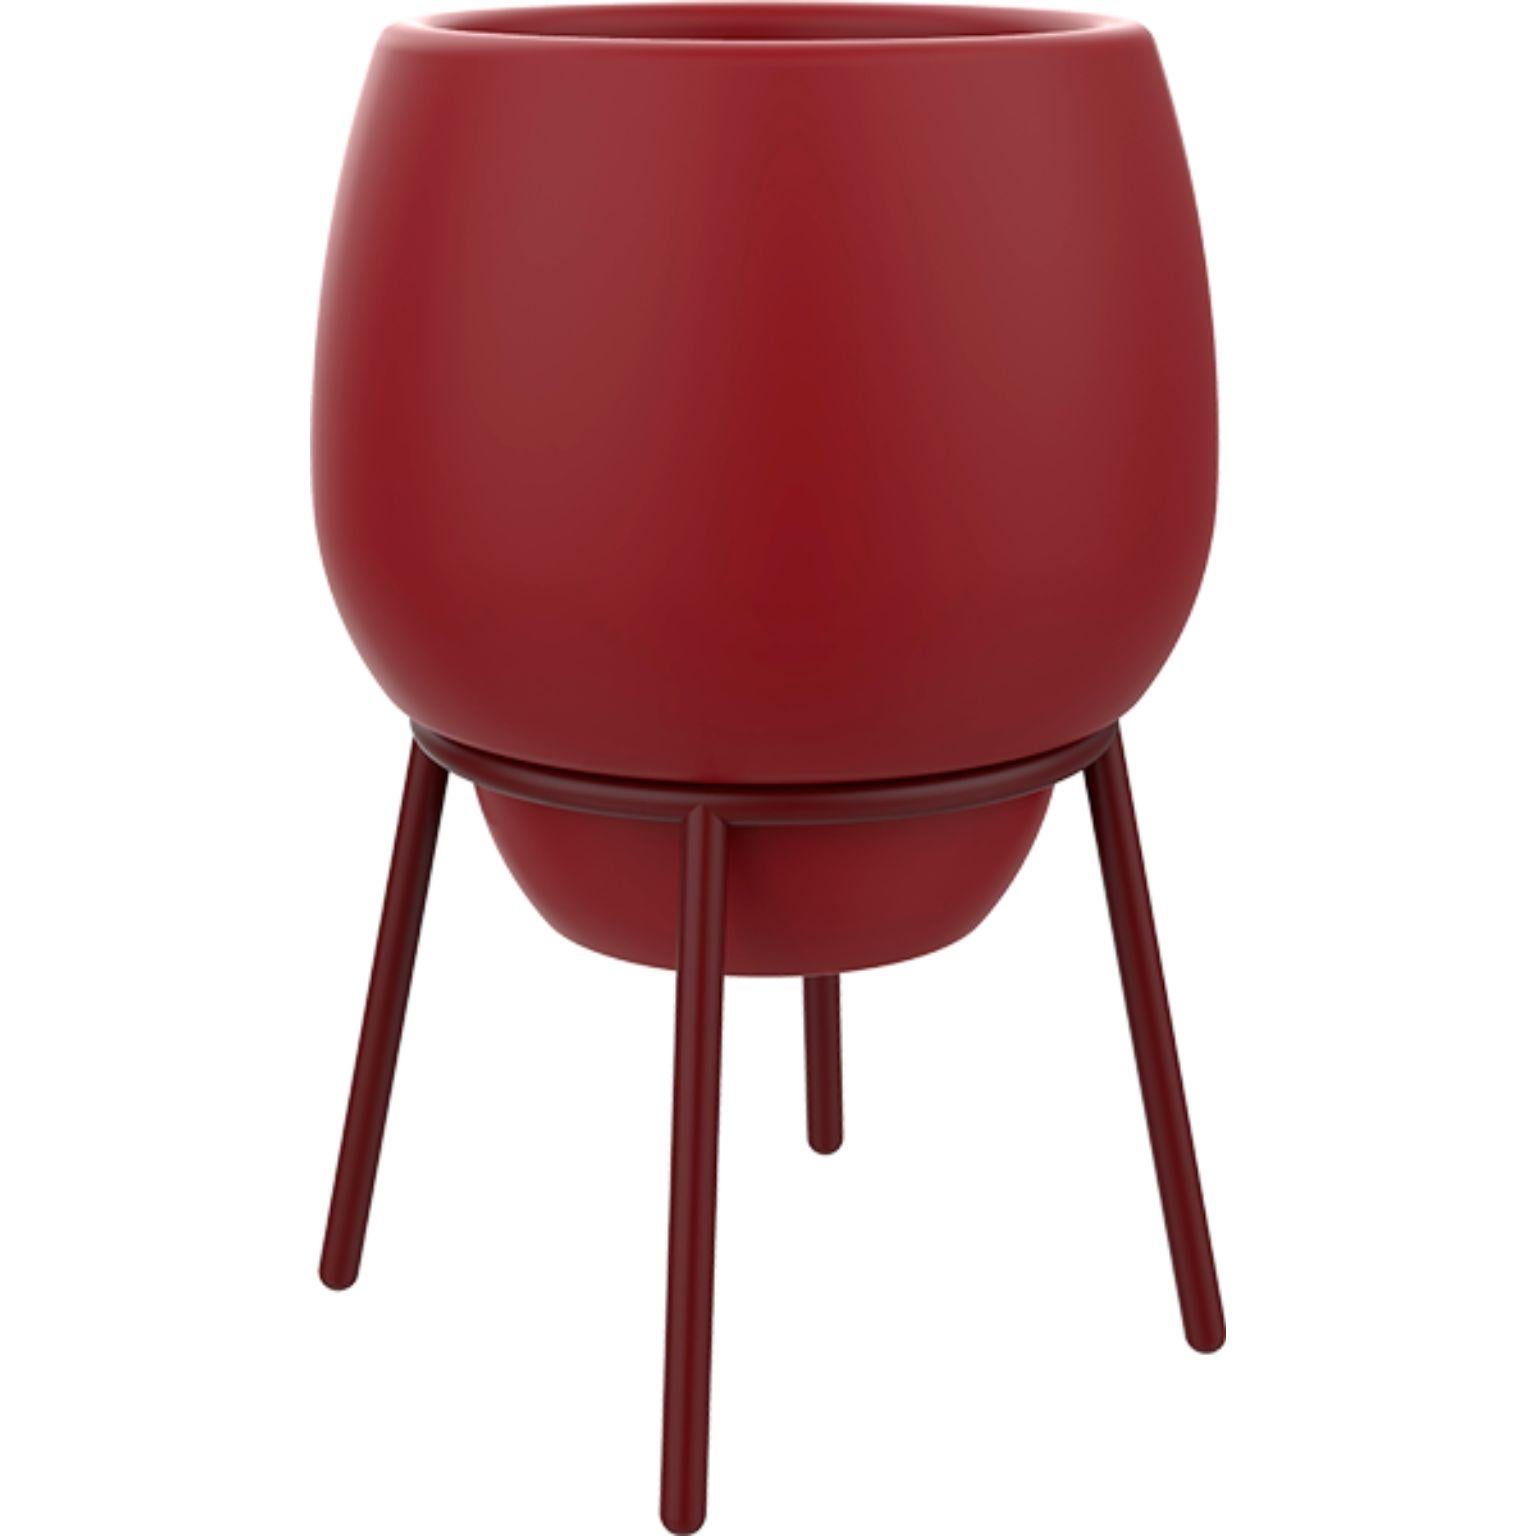 Lace Burgundy 50 low pot by Mowee
Dimensions: Ø 55 x H 76 cm.
Material: Polyethylene and stainless steel.
Weight: 6 kg.
Also available in different colors and finishes (Lacquered or retroilluminated).

Lace is a collection of furniture made by